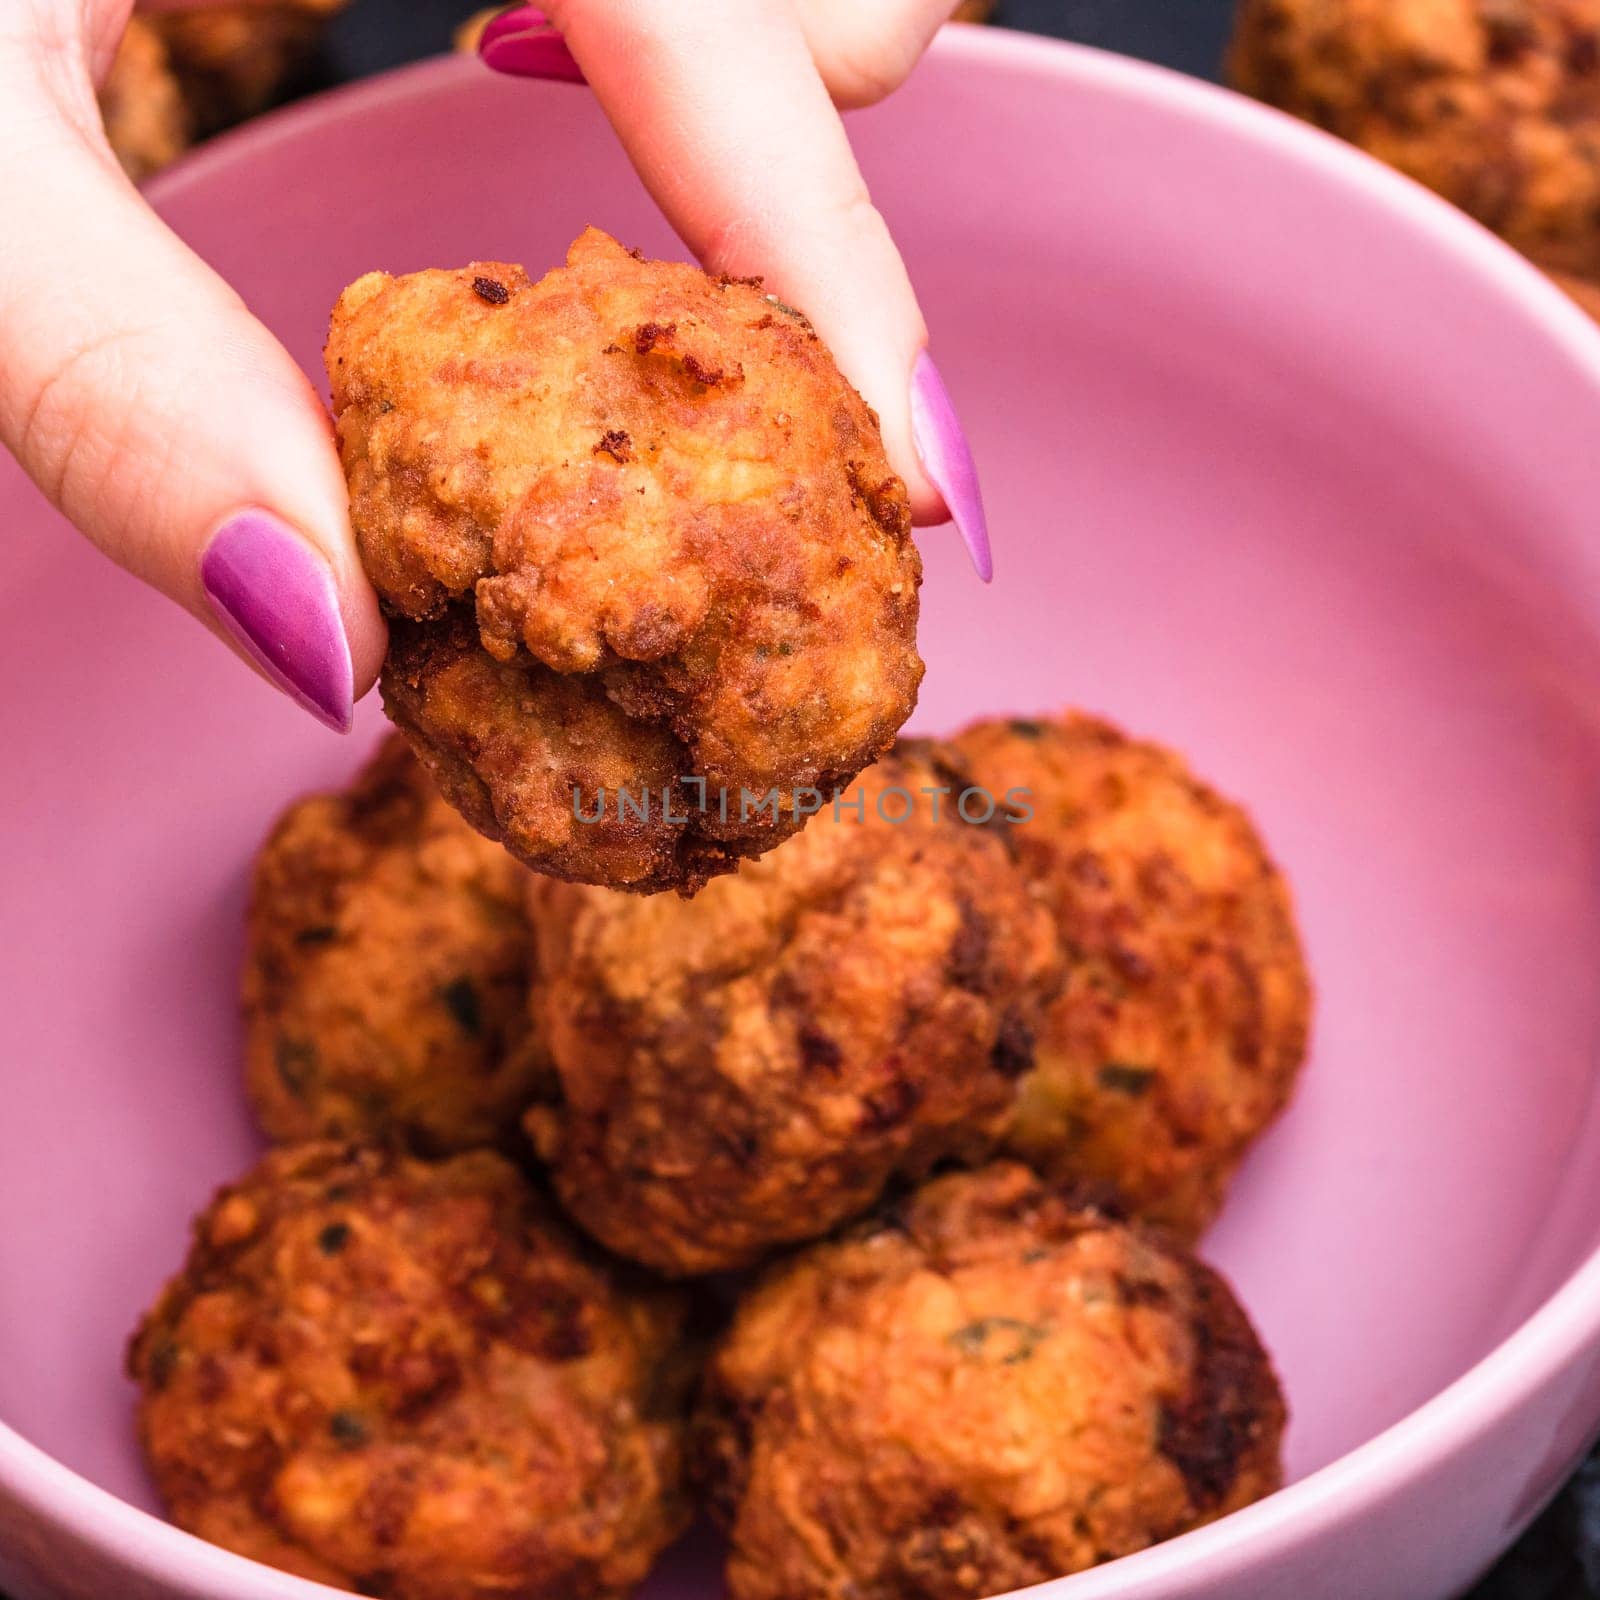 Pink bowl with fried meatballs with spices. Homemade food. Hand holding a fried meatball.